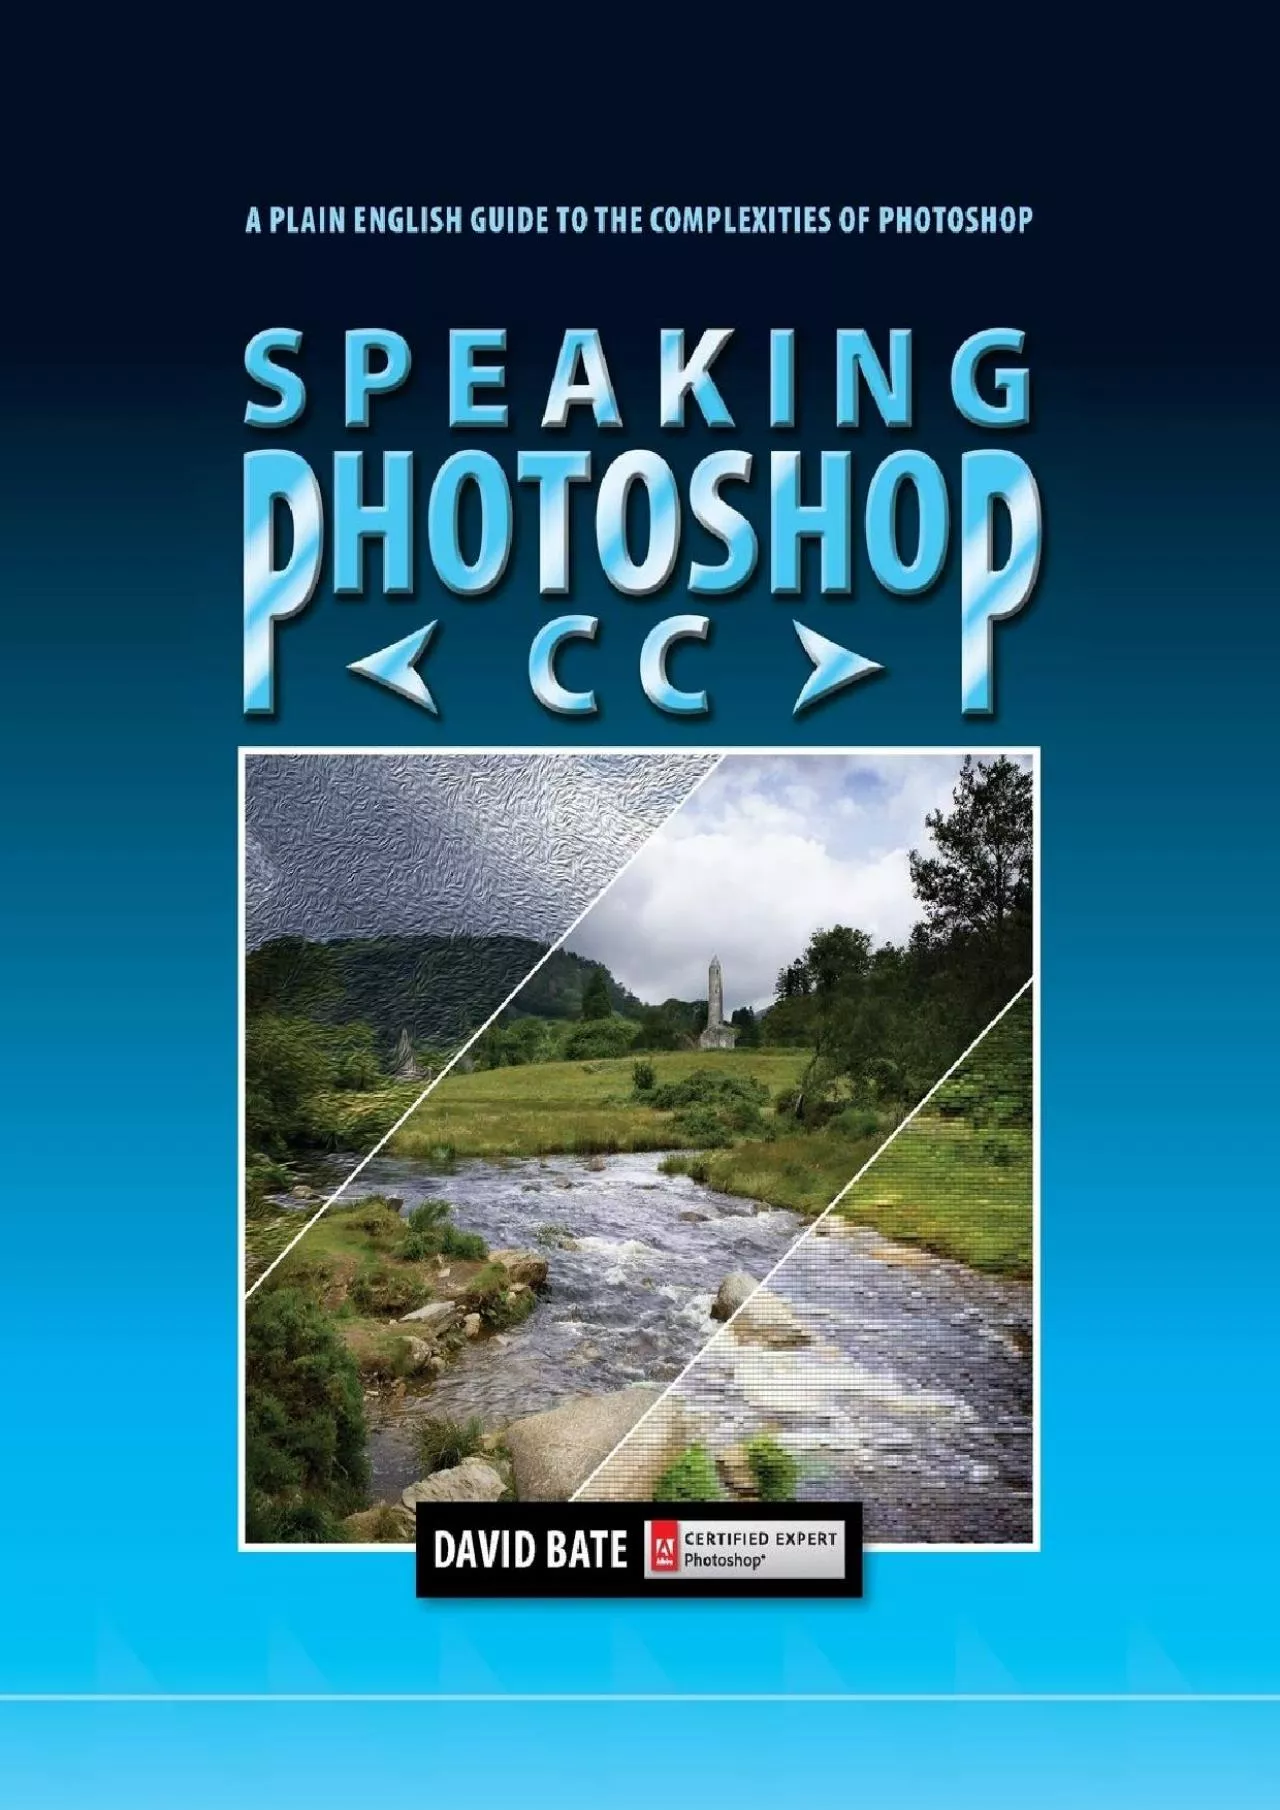 (EBOOK)-Speaking Photoshop CC: A Plain English Guide to the Complexities of Photoshop